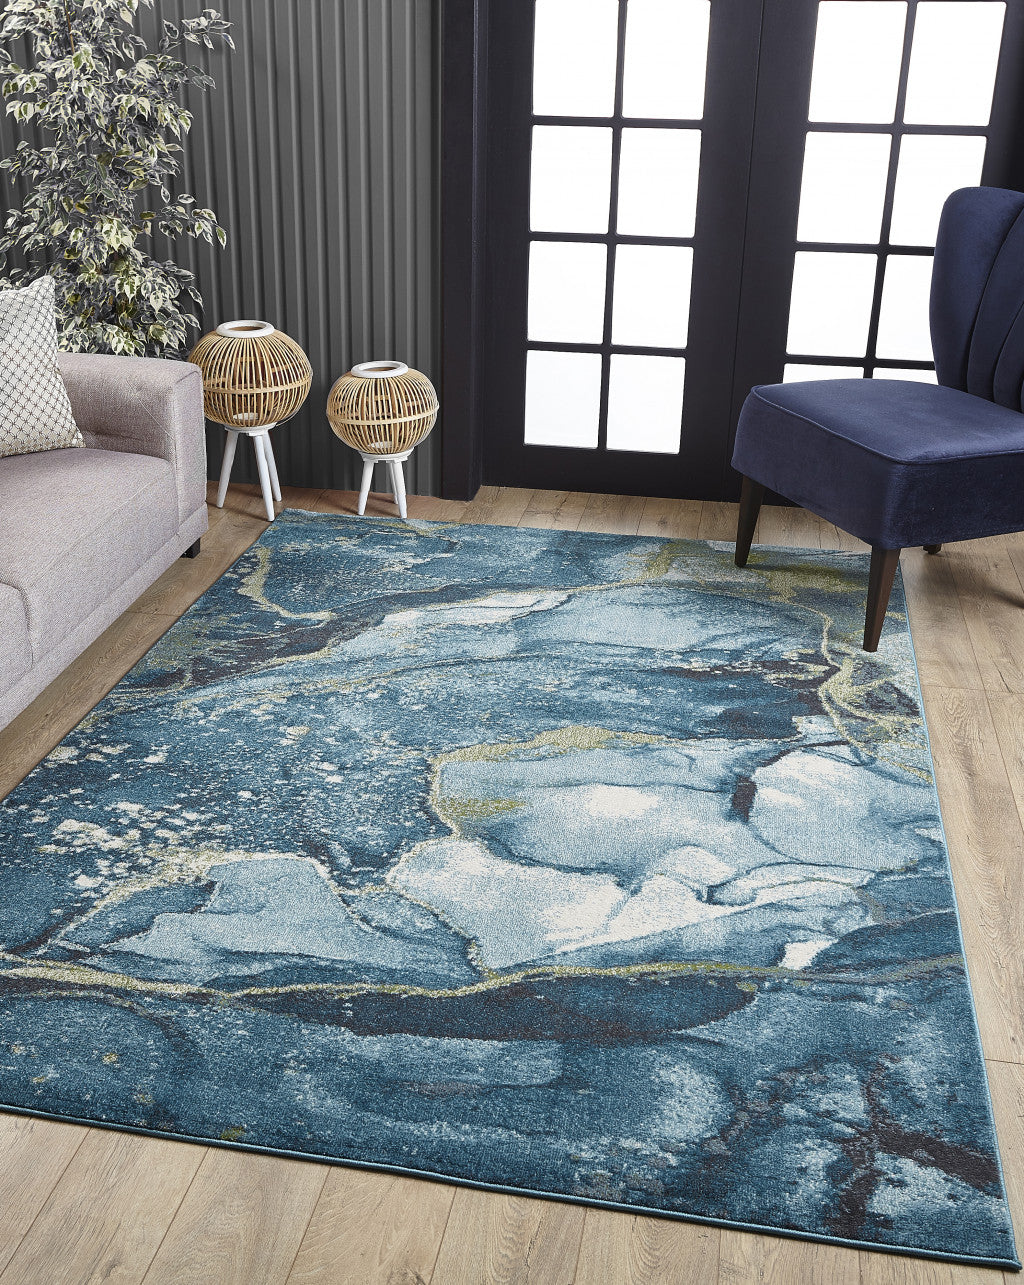 8' X 11' Teal Blue Abstract Dhurrie Area Rug